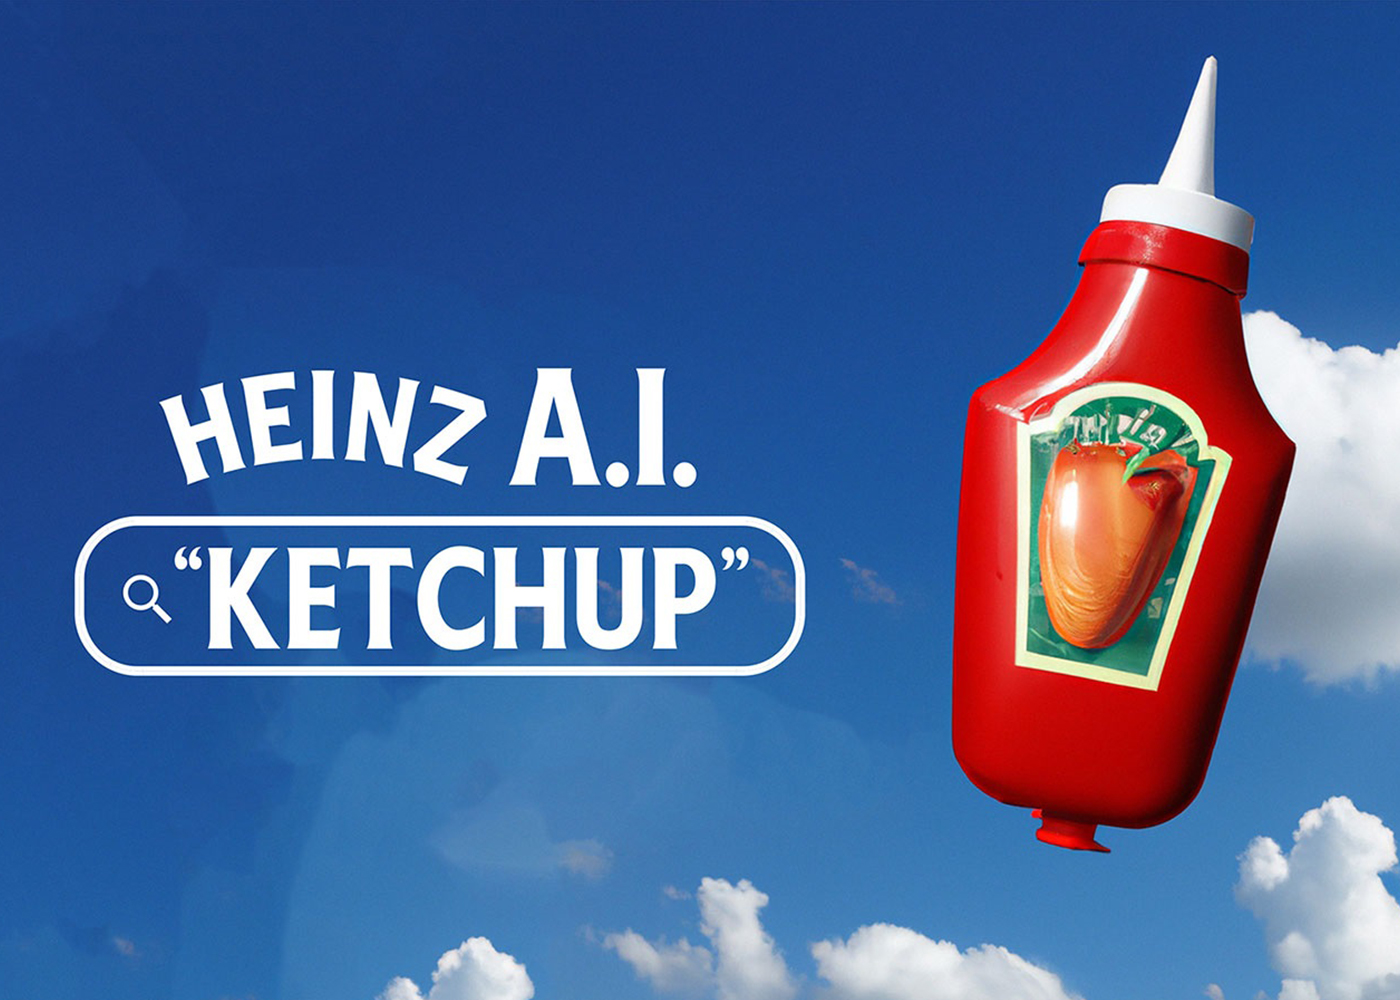 AI text to image technology associate ketchup to Heinz